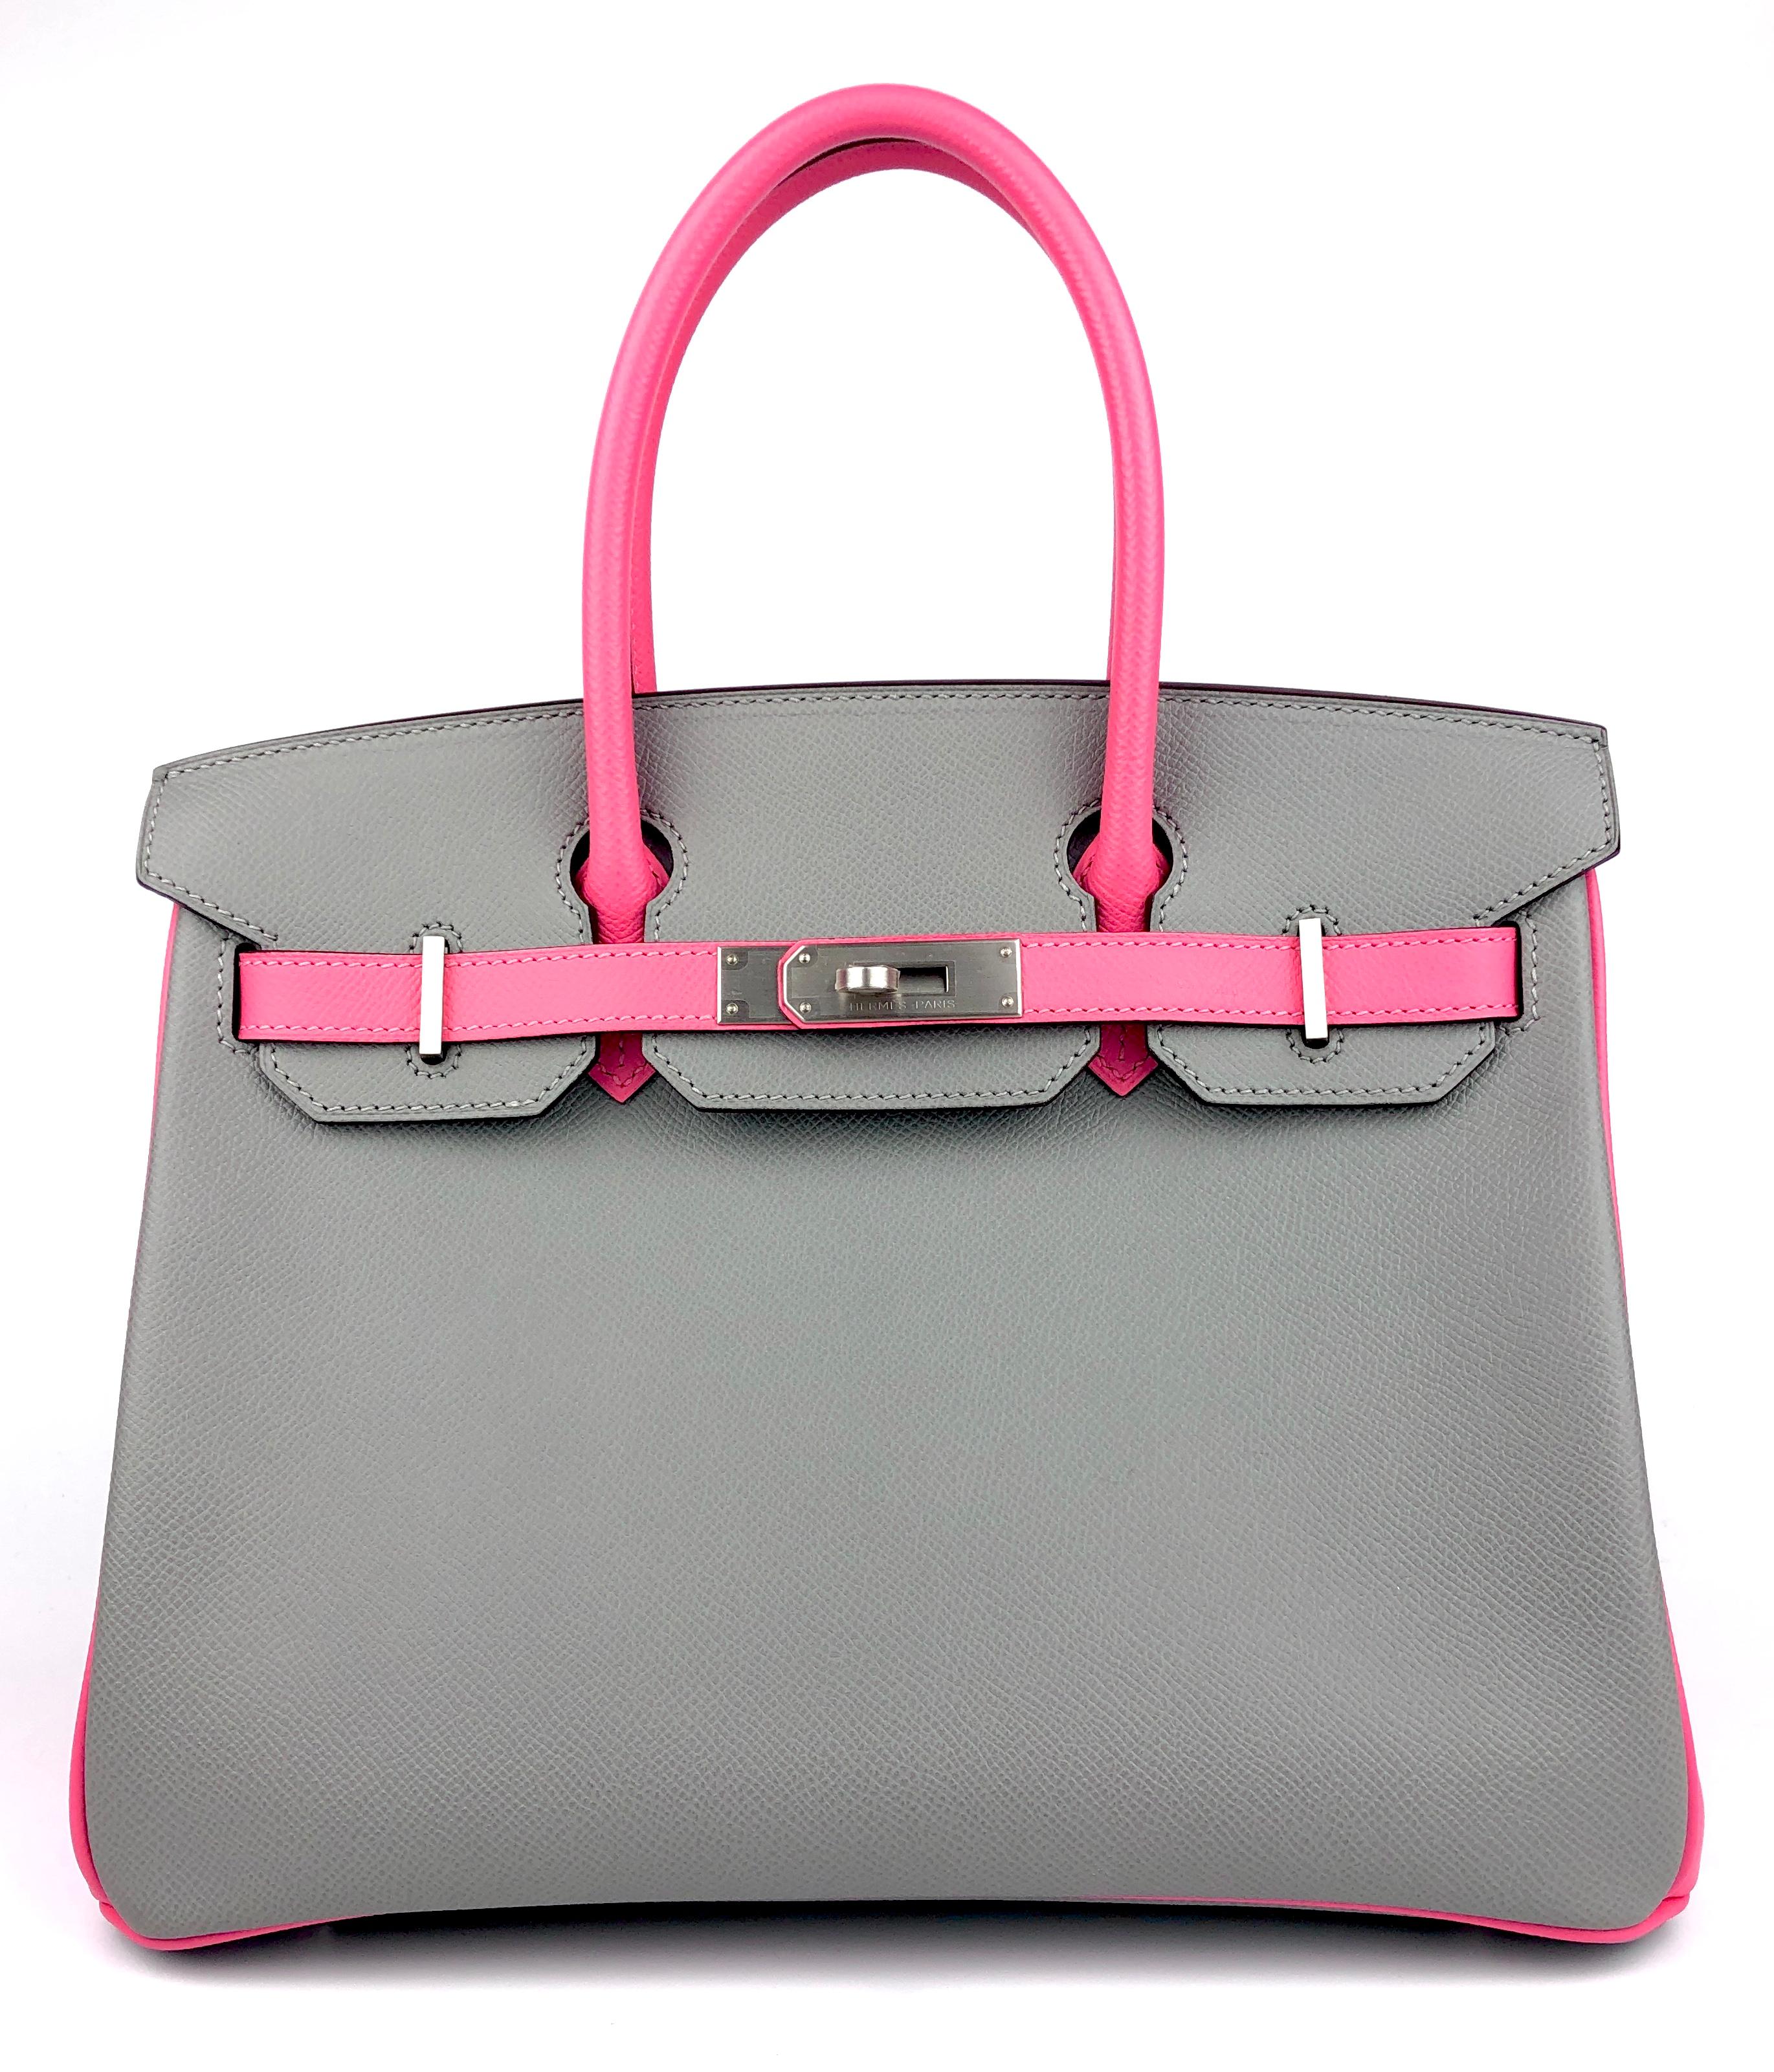 Like New Stunning 1 of 1 Hermes Birkin 30 HSS Special Order Gris Mouette & Rose Azalee Epsom Leather Complimented by Brushed Palladium Hardware.

Shop with Confidence from Lux Addicts. Authenticity Guaranteed! 